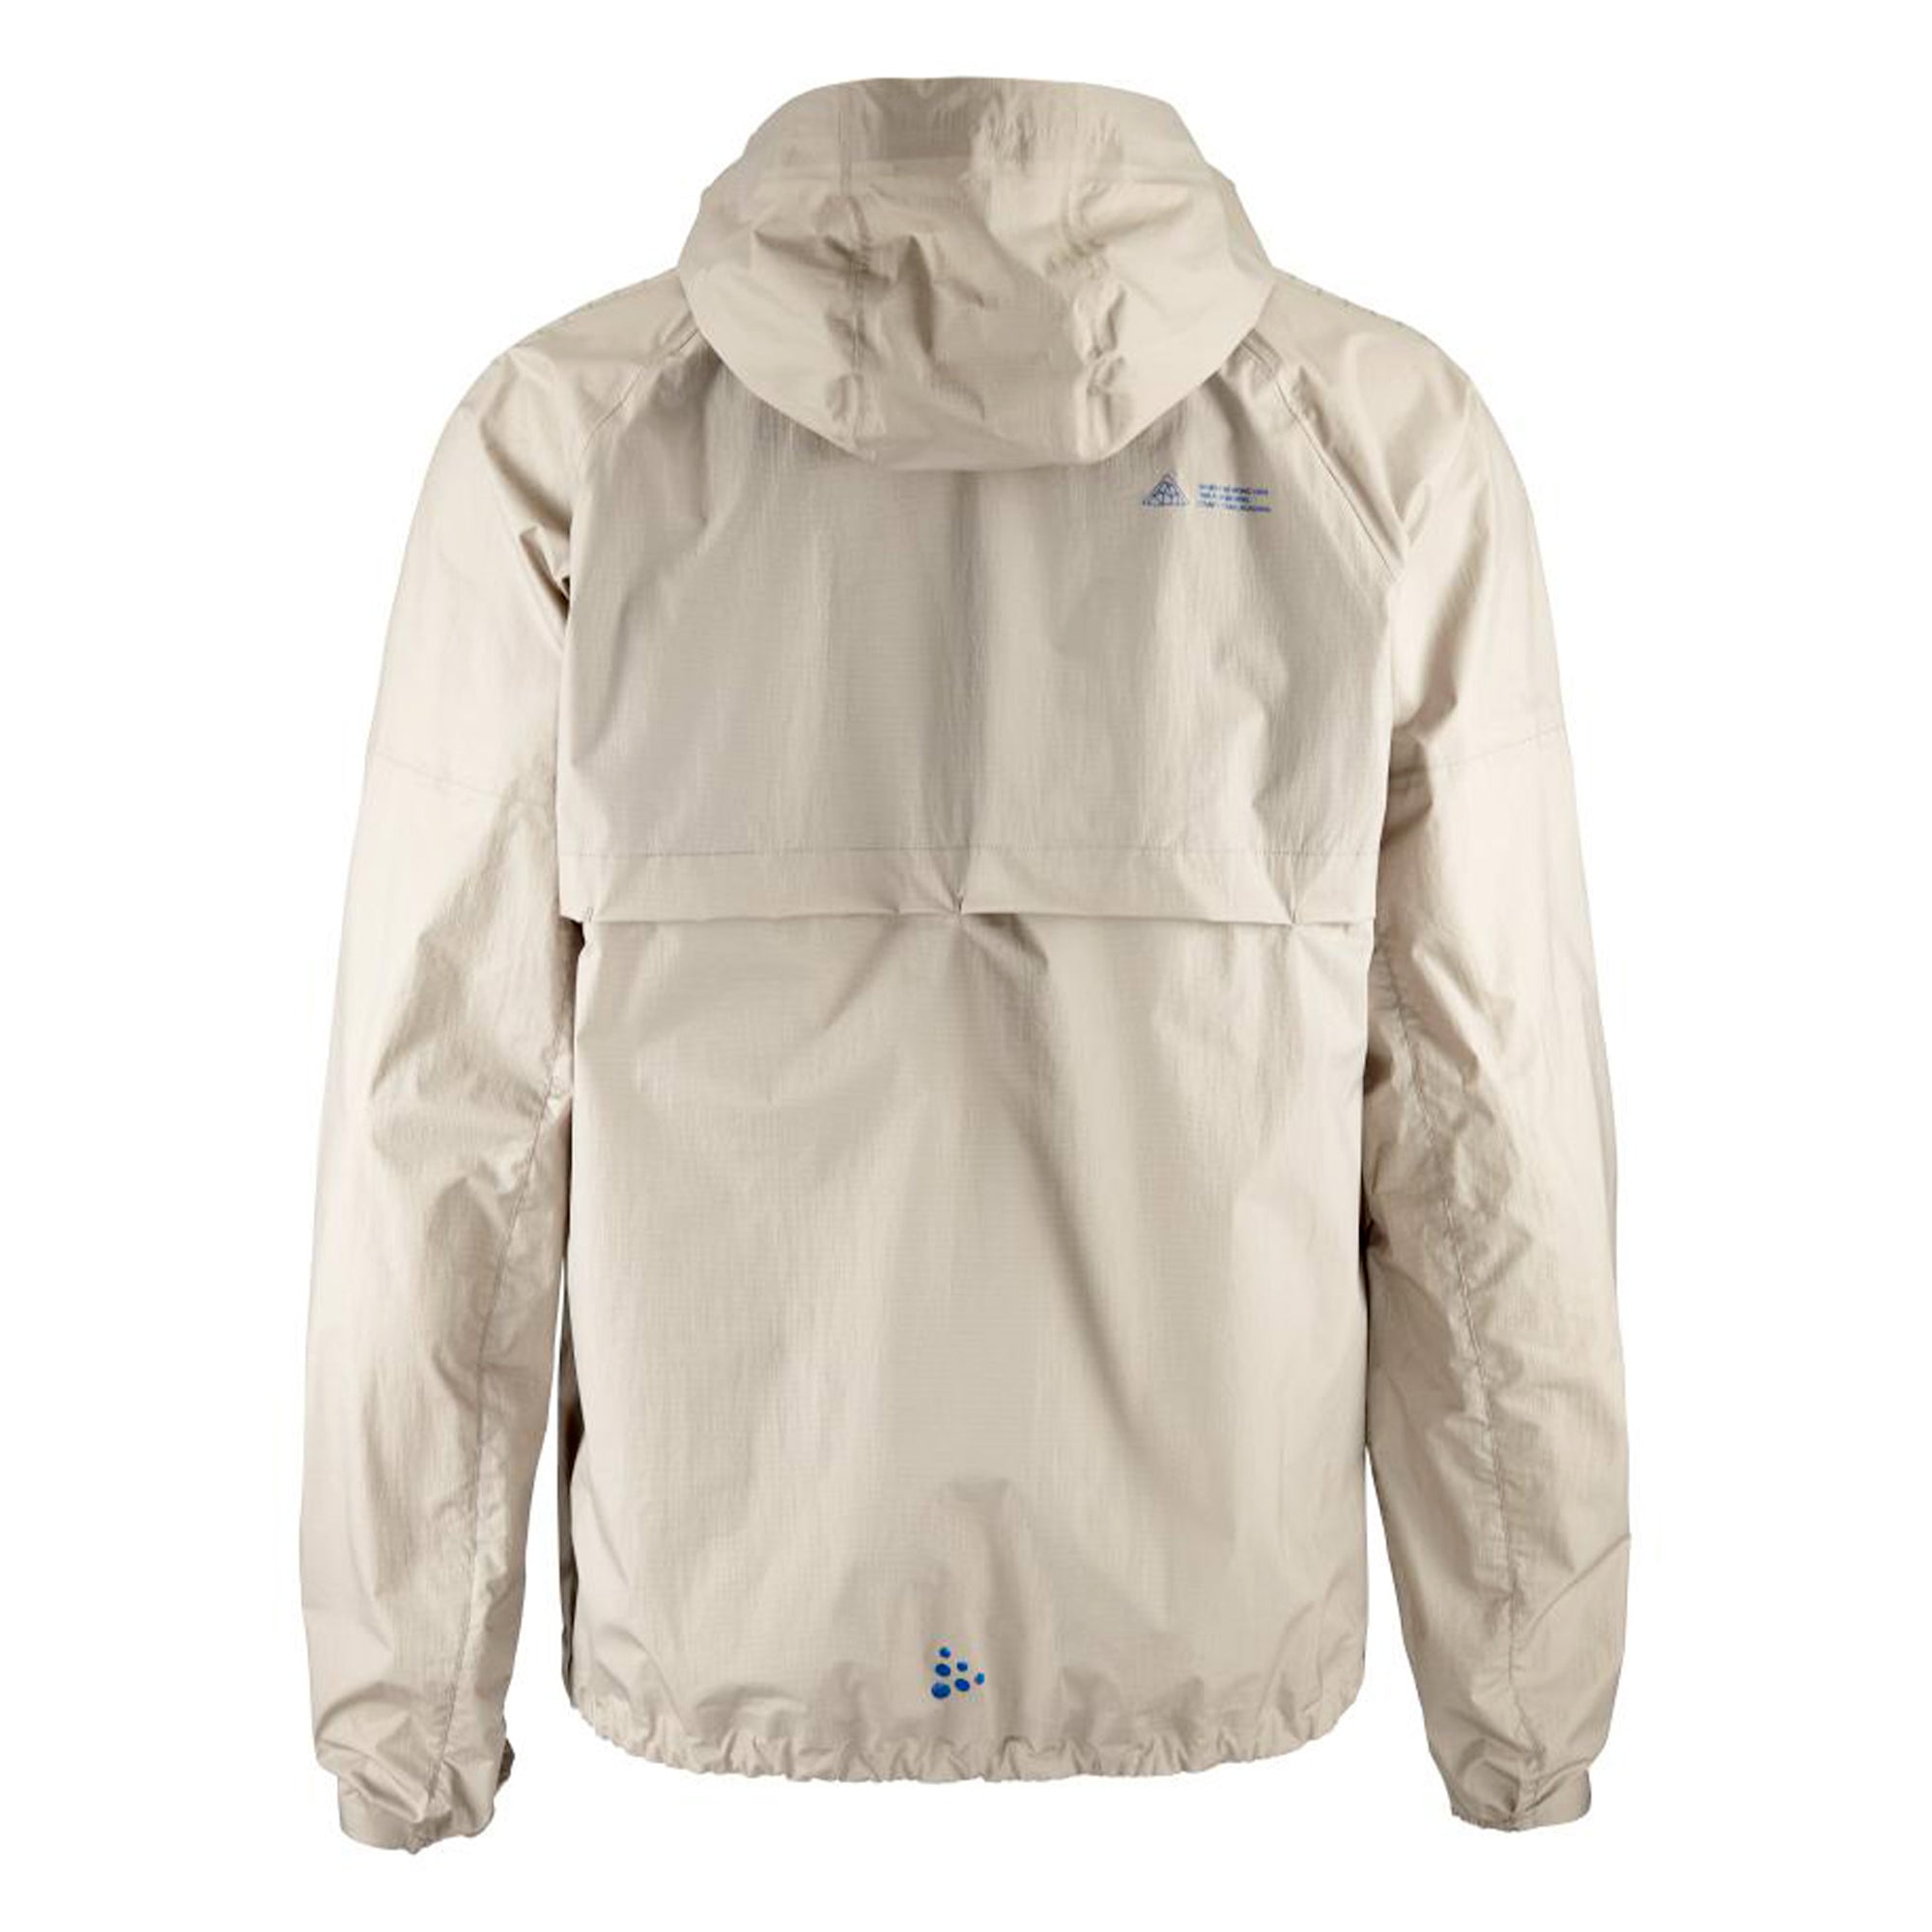 CRAFT PRO TRAIL 2L LIGHT WEIGHT JACKET - HOMME